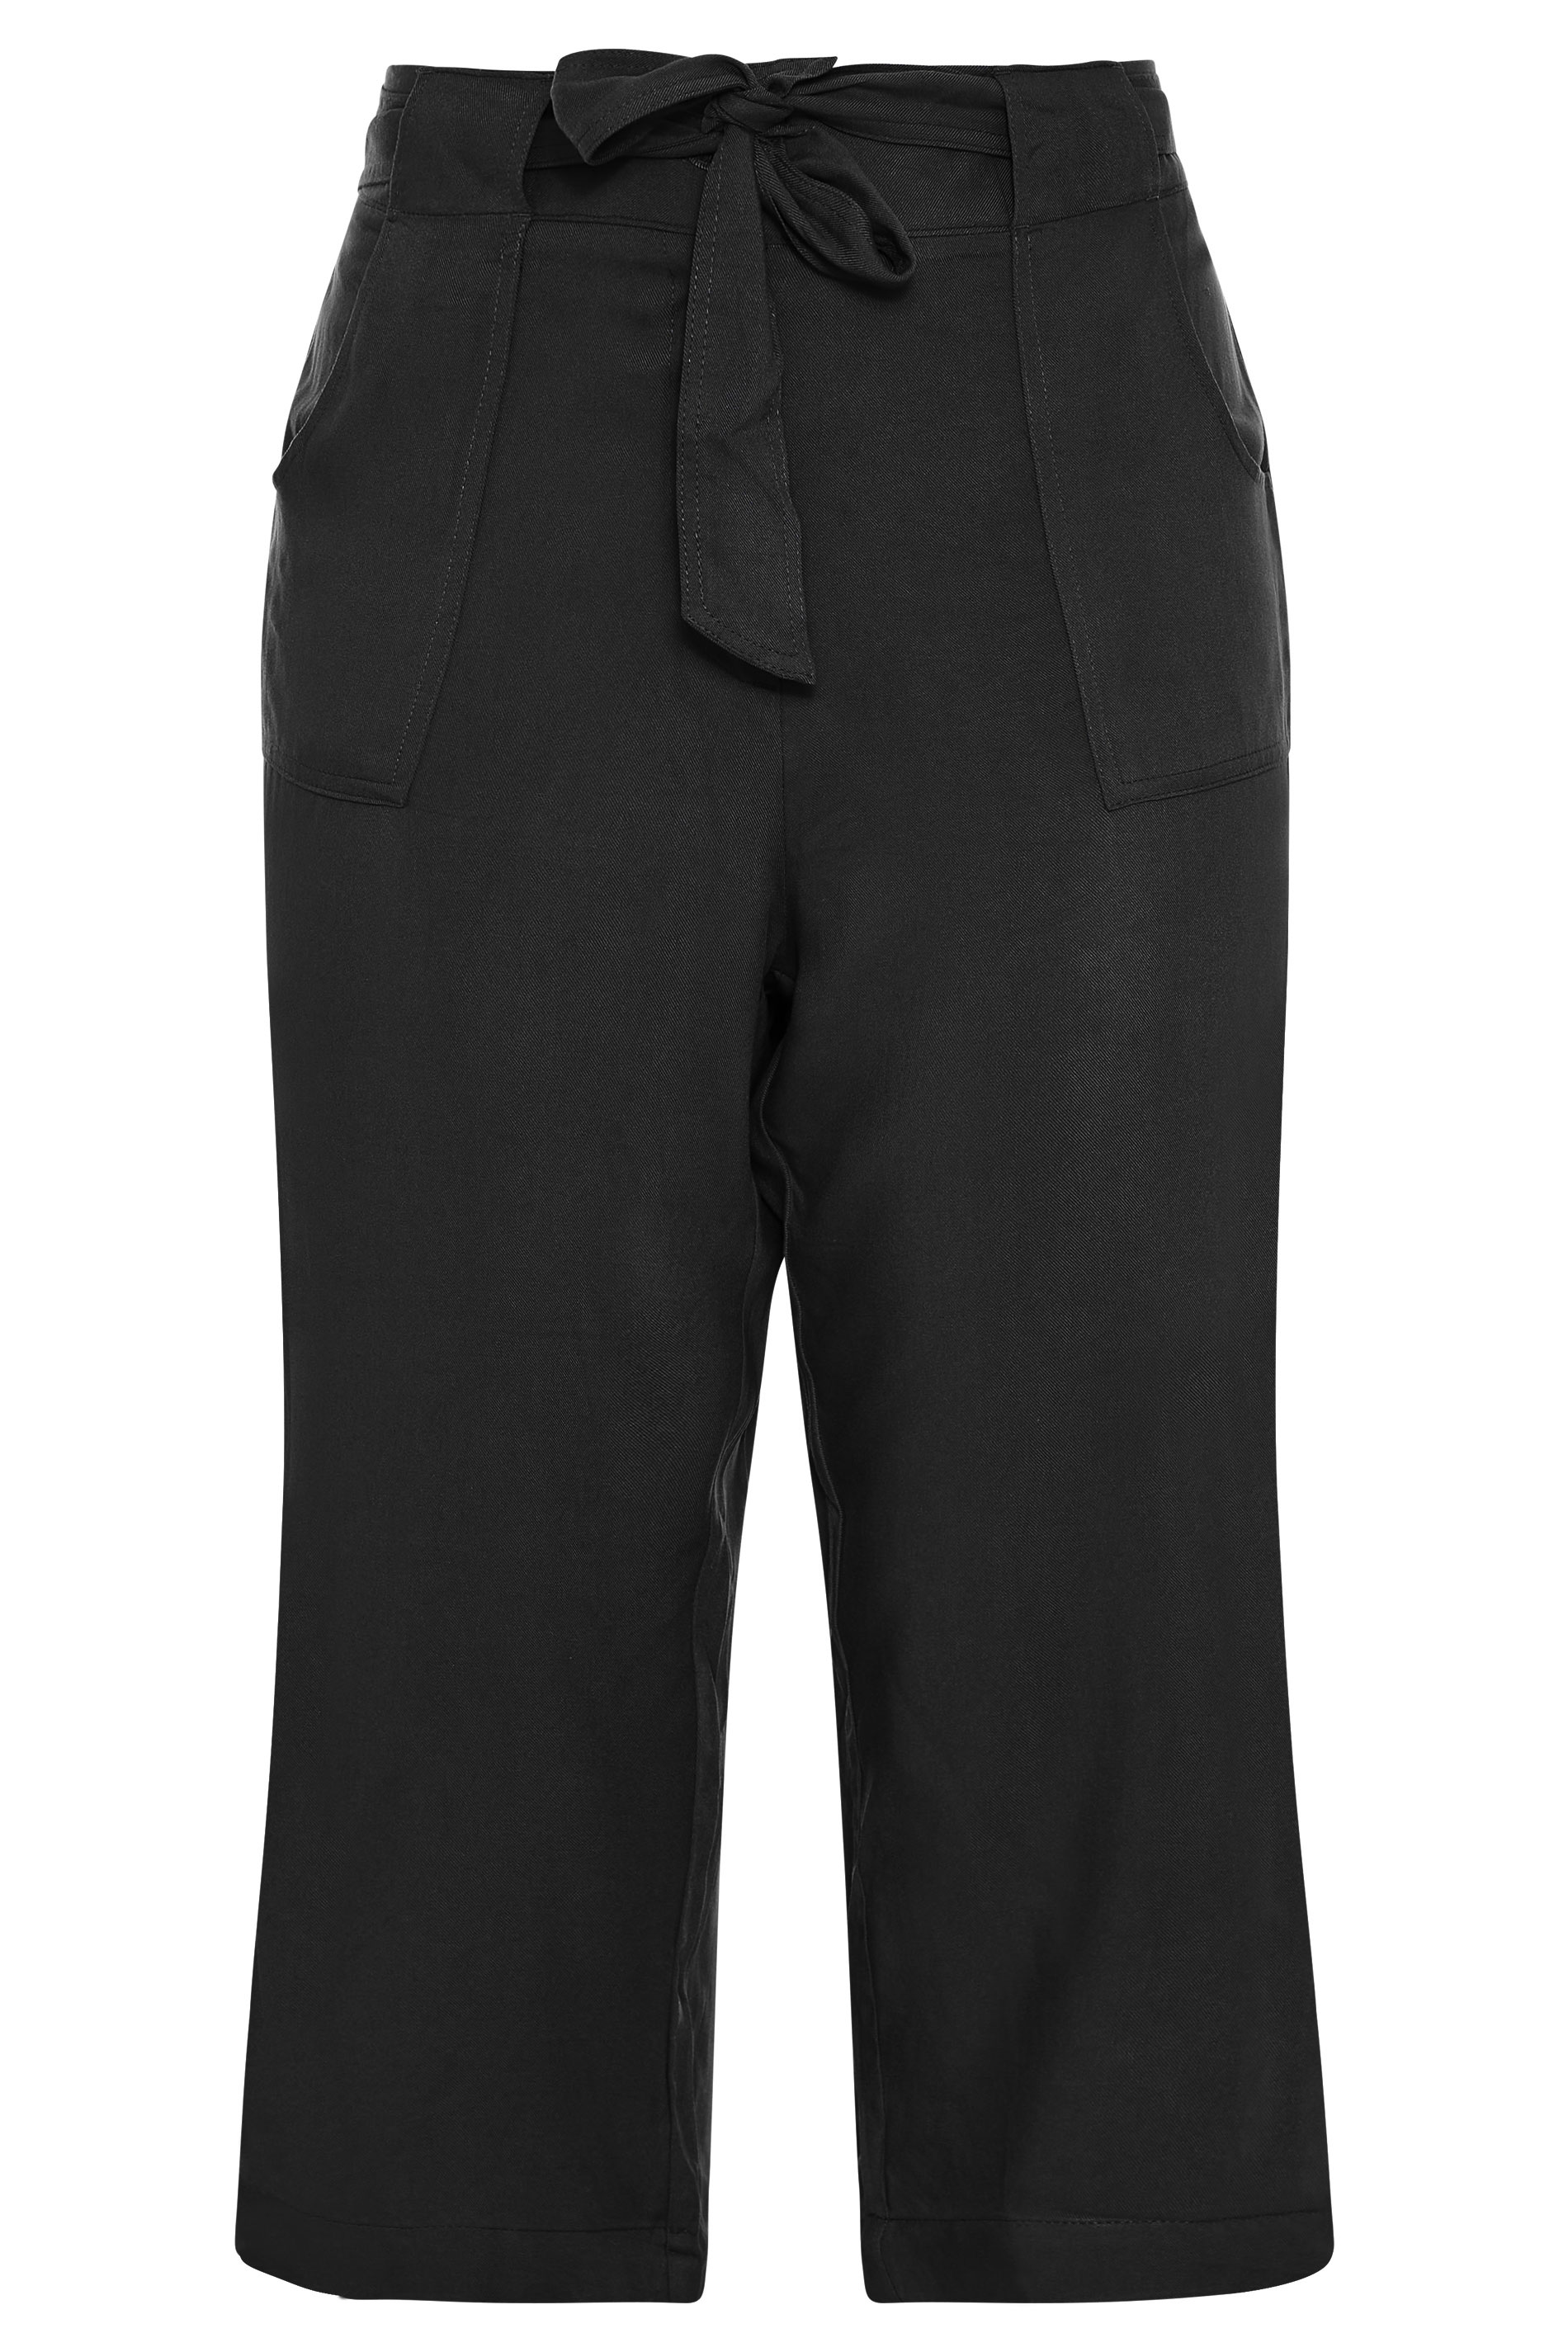 Black Belted Cropped Trousers | Yours Clothing